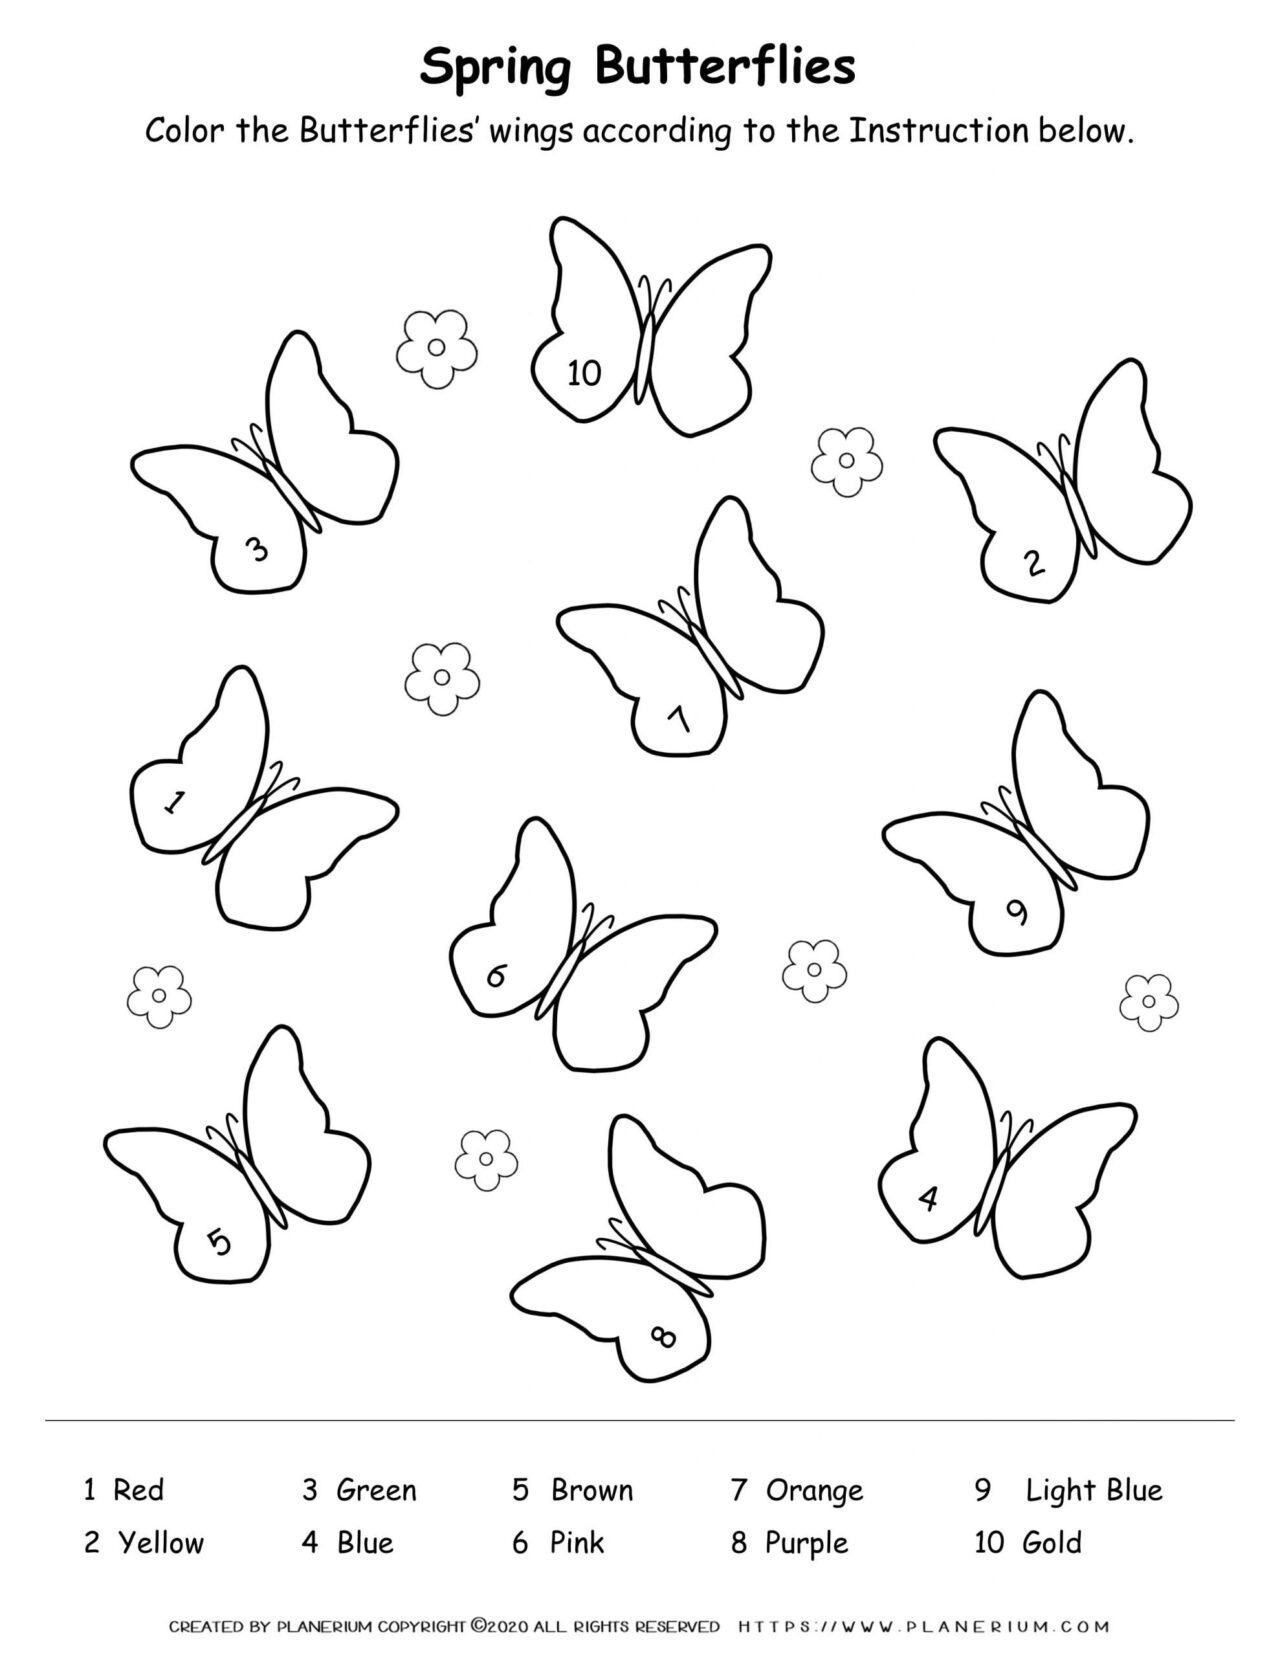 Butterflies Color by Number Worksheet for Kids